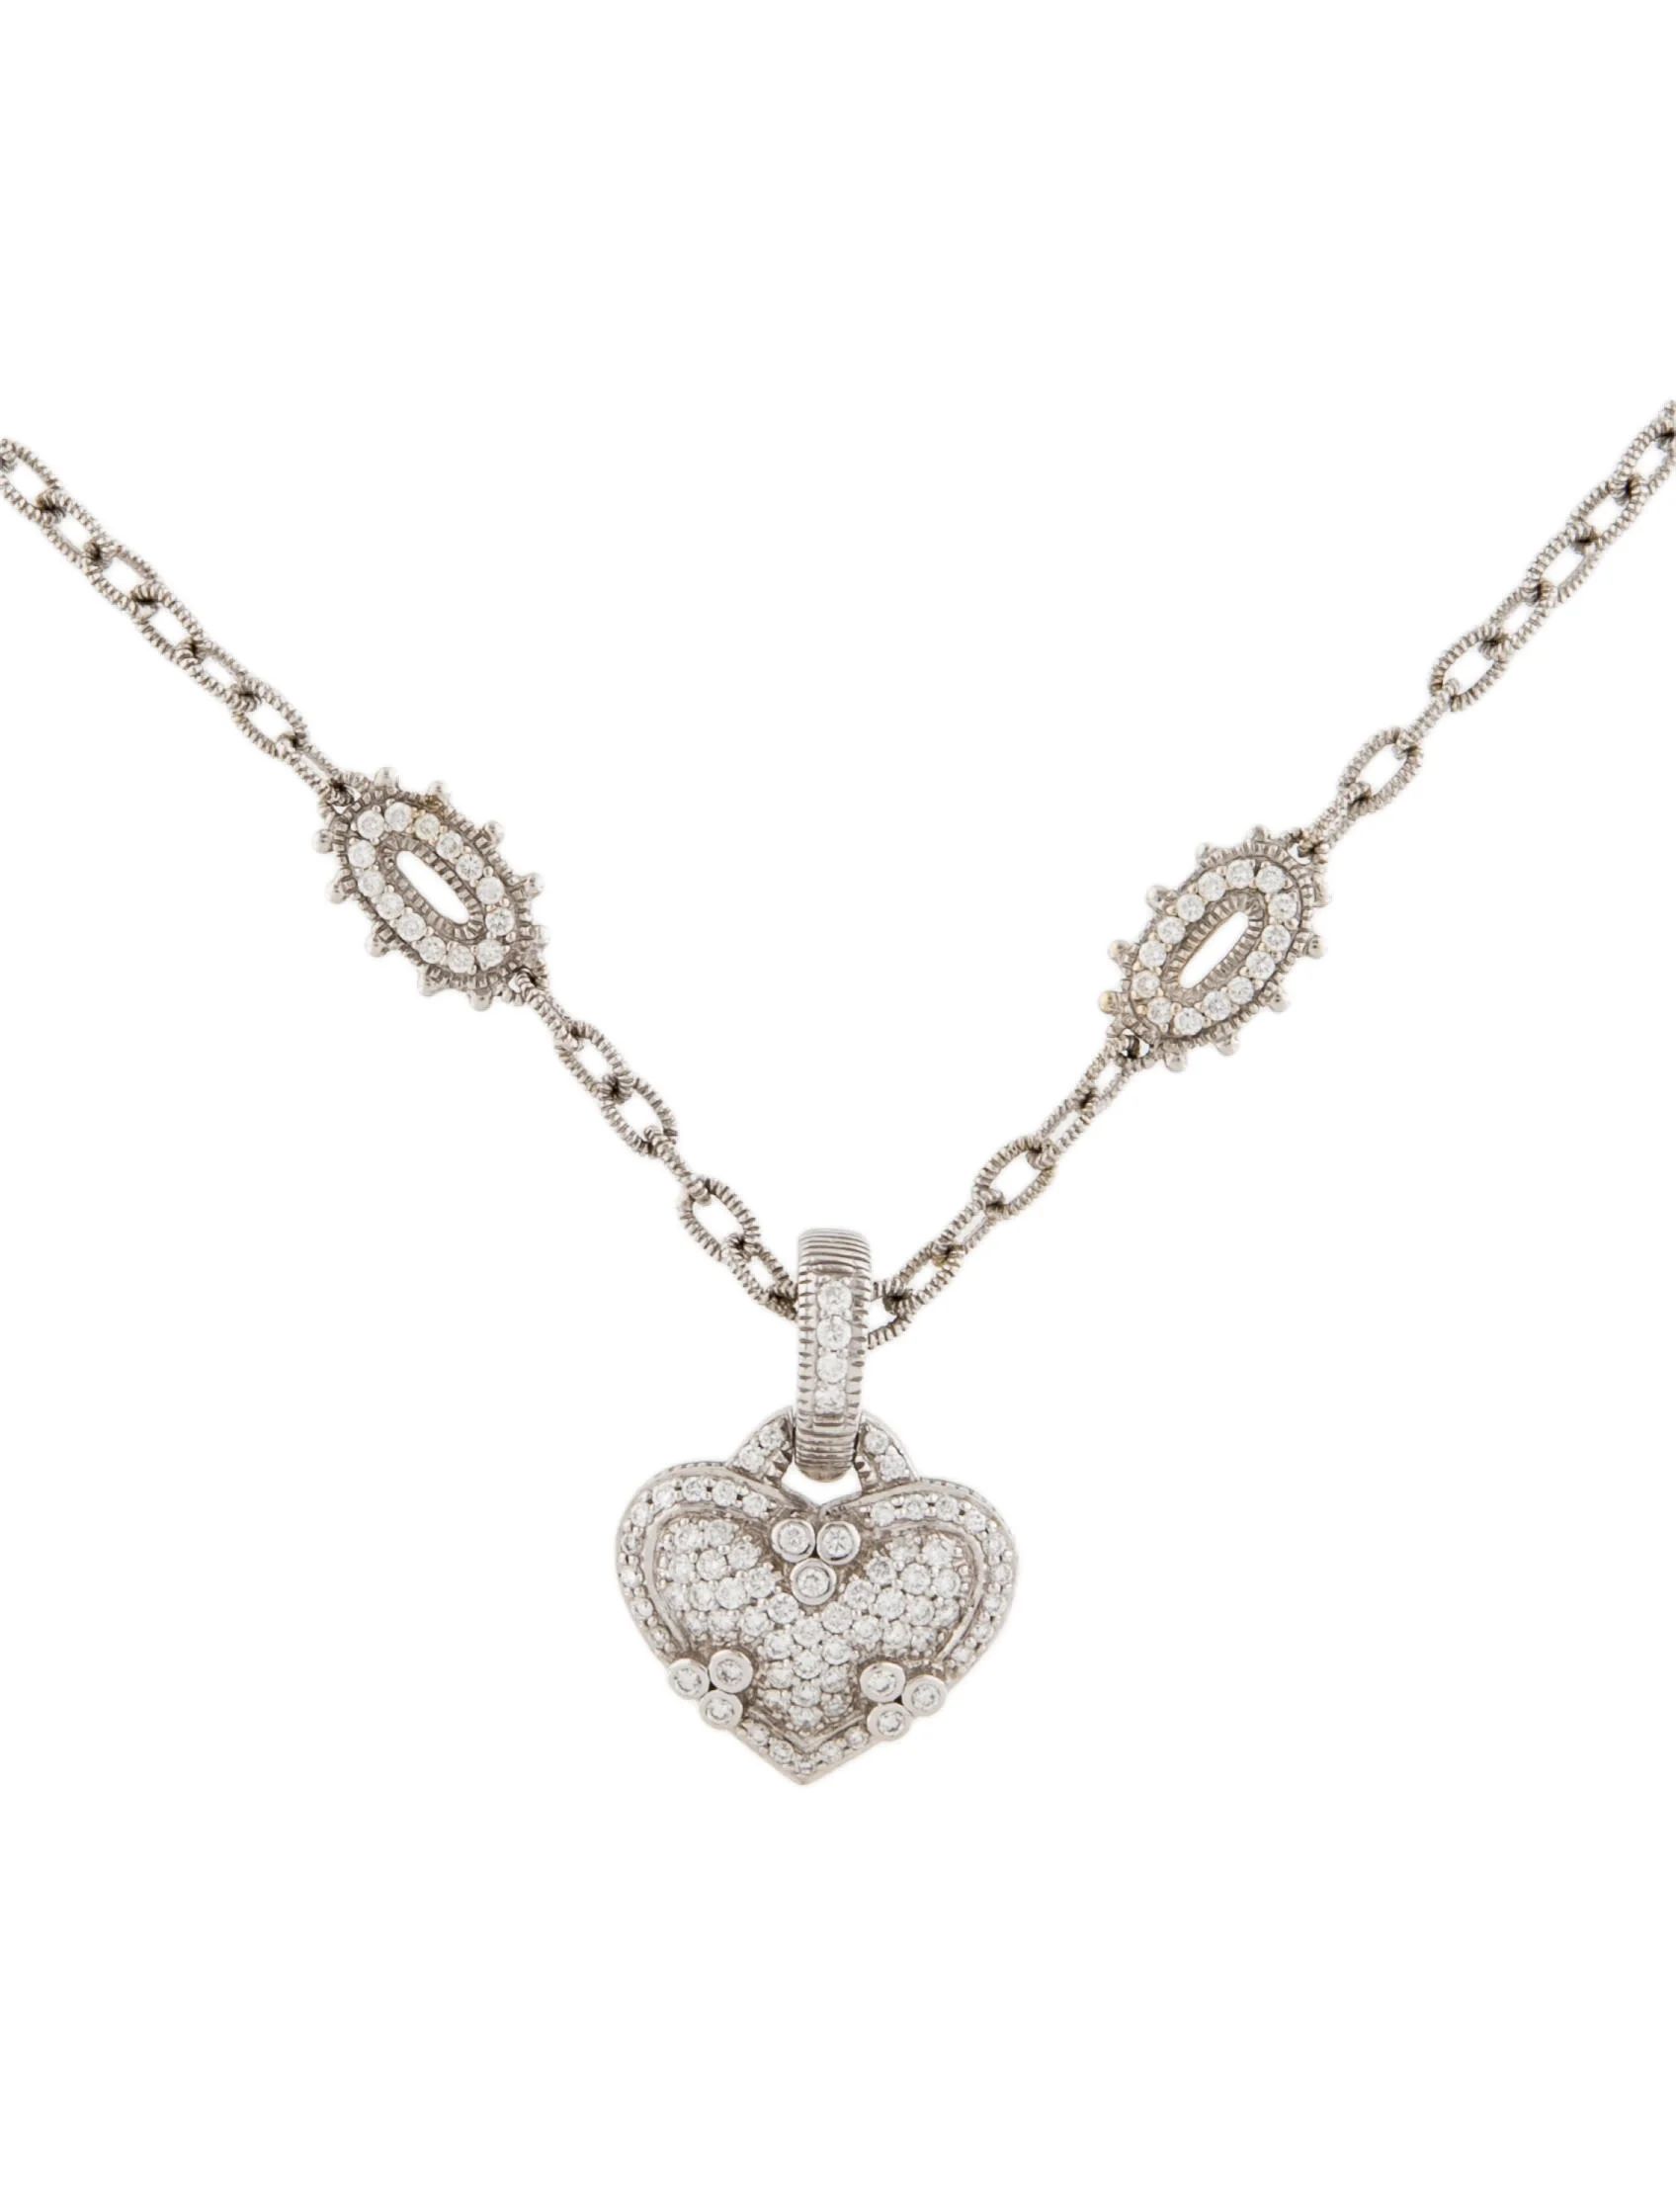 18K Diamond Station Necklace | The RealReal